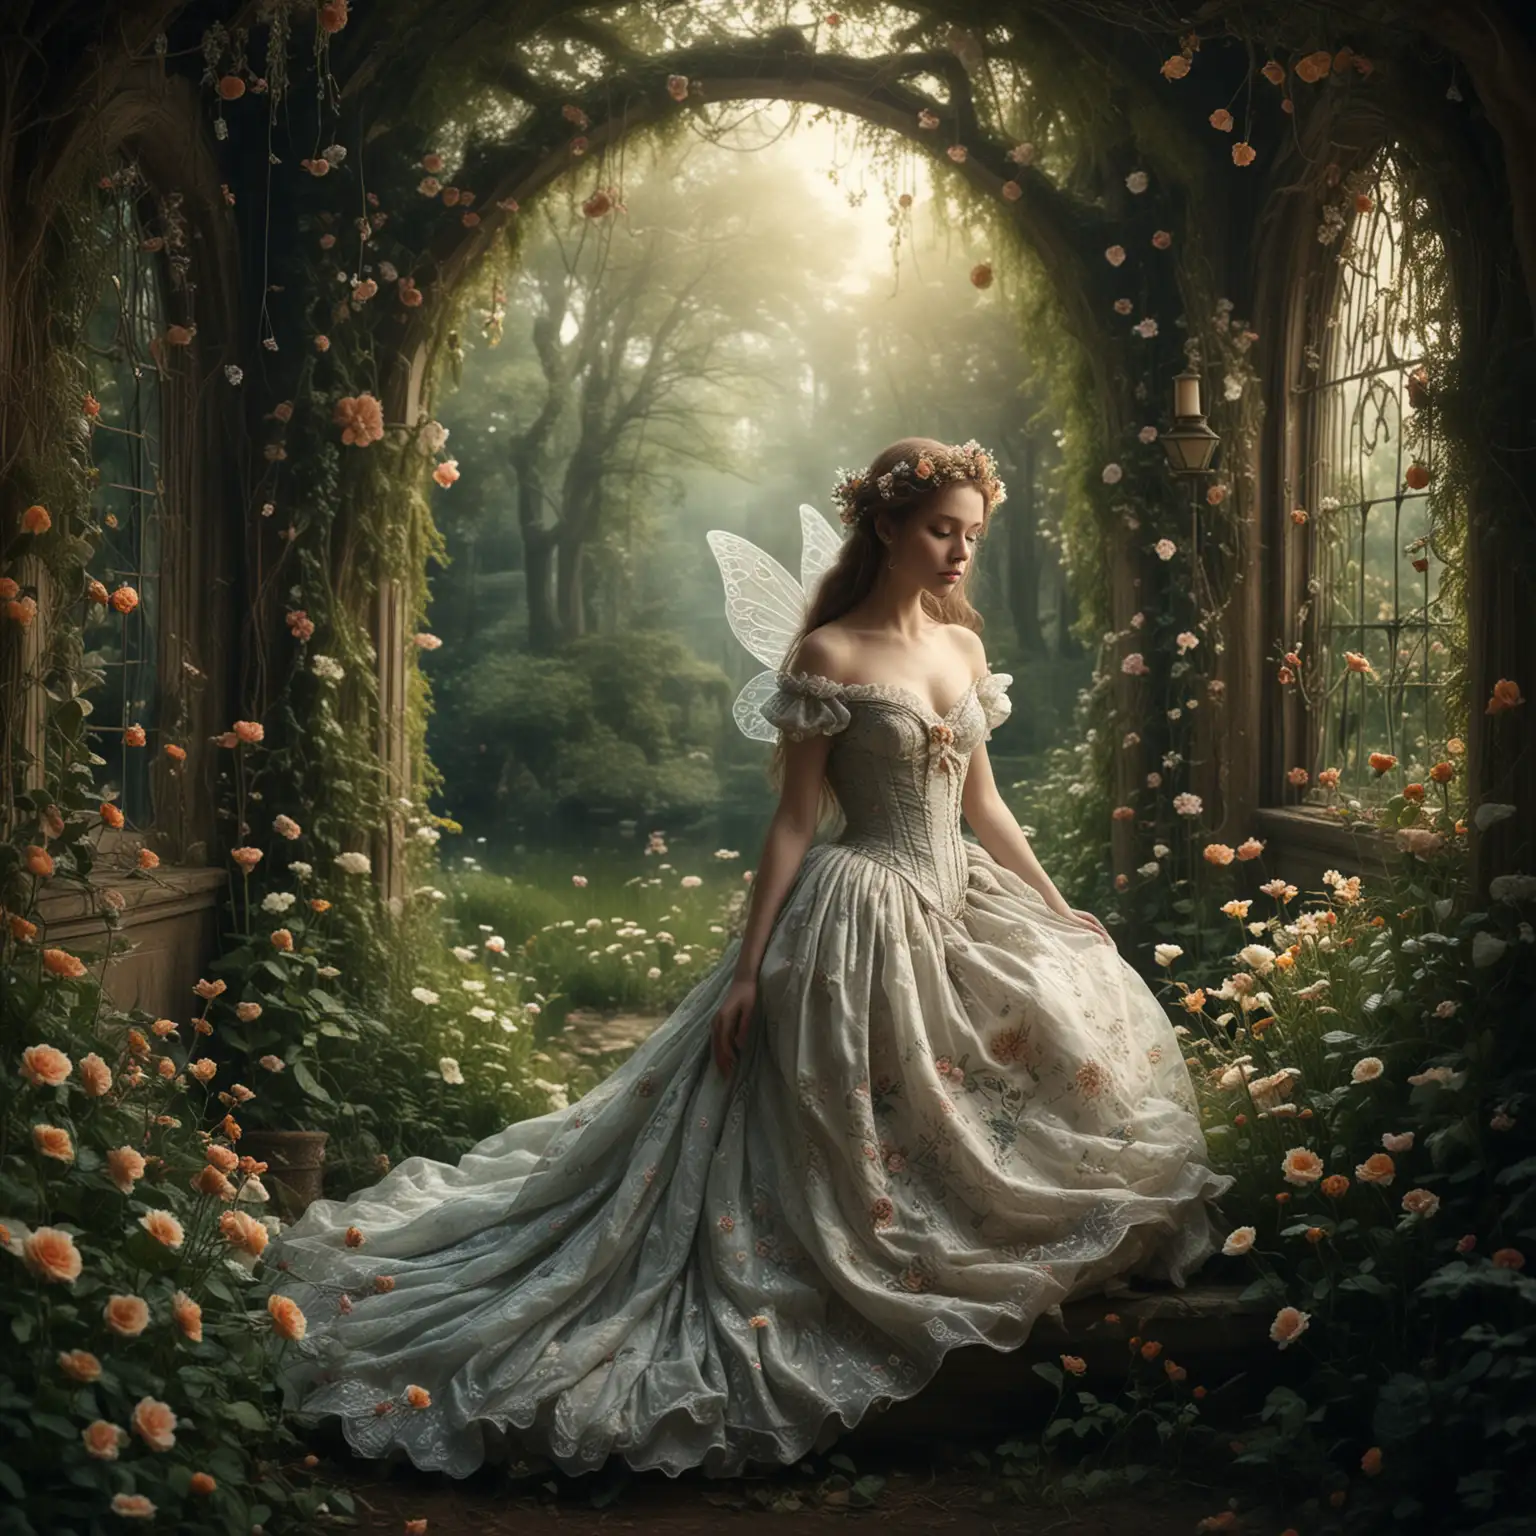 Enigmatic Victorian Fairy Tale with Mystical Female Figure and Ethereal Landscape